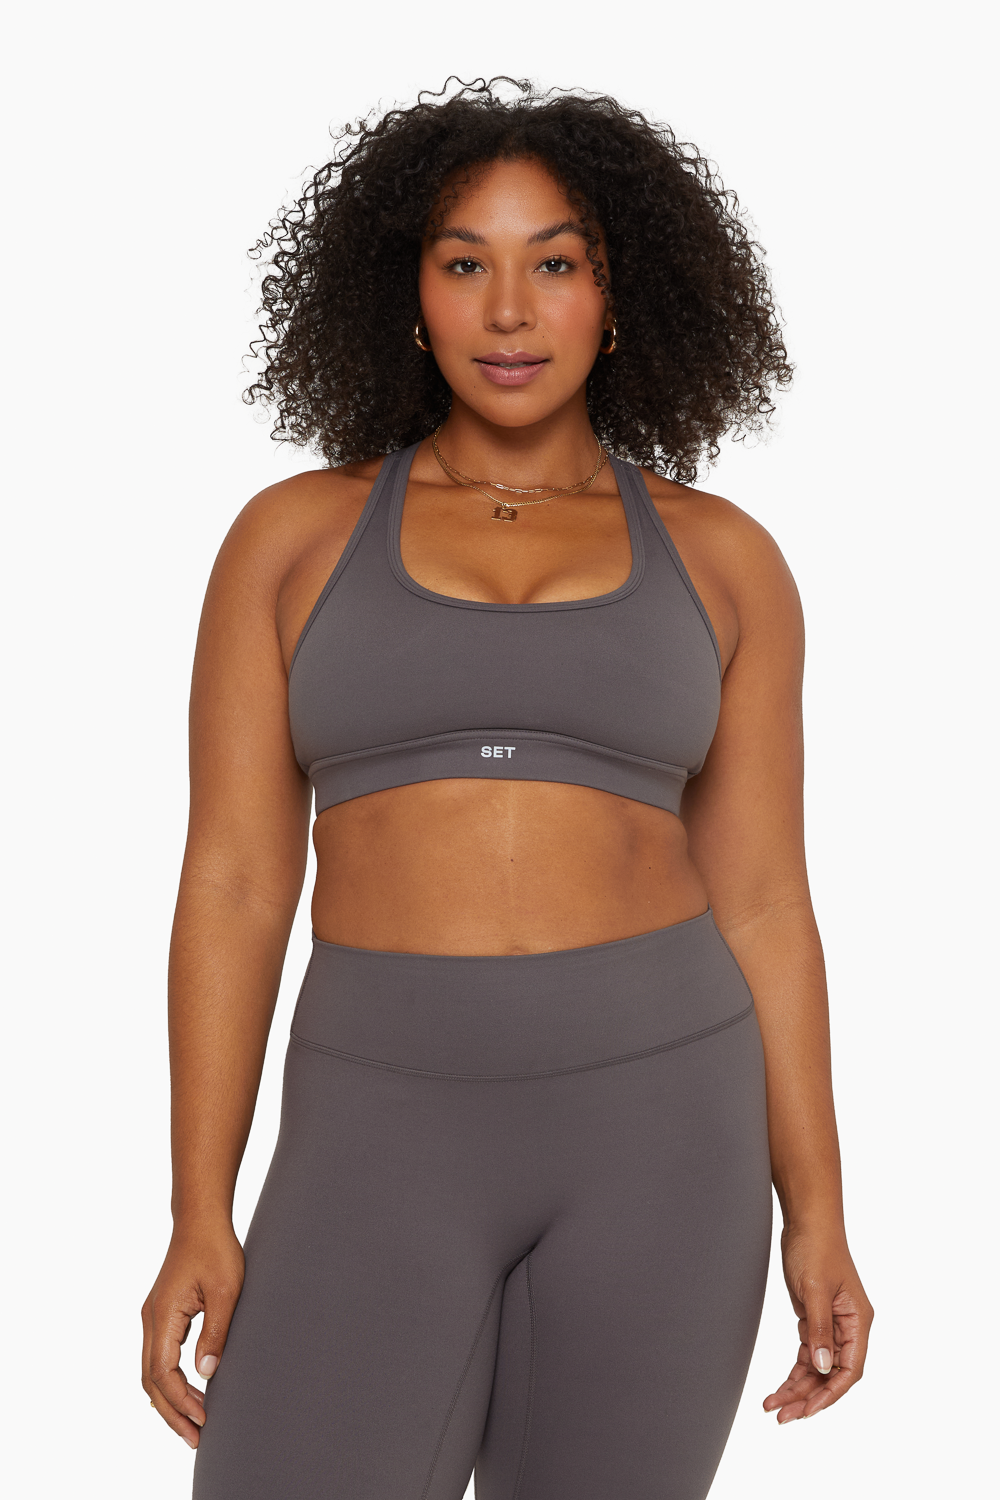 FORMCLOUD™ RACER BACK BRA - GRAPHITE Featured Image